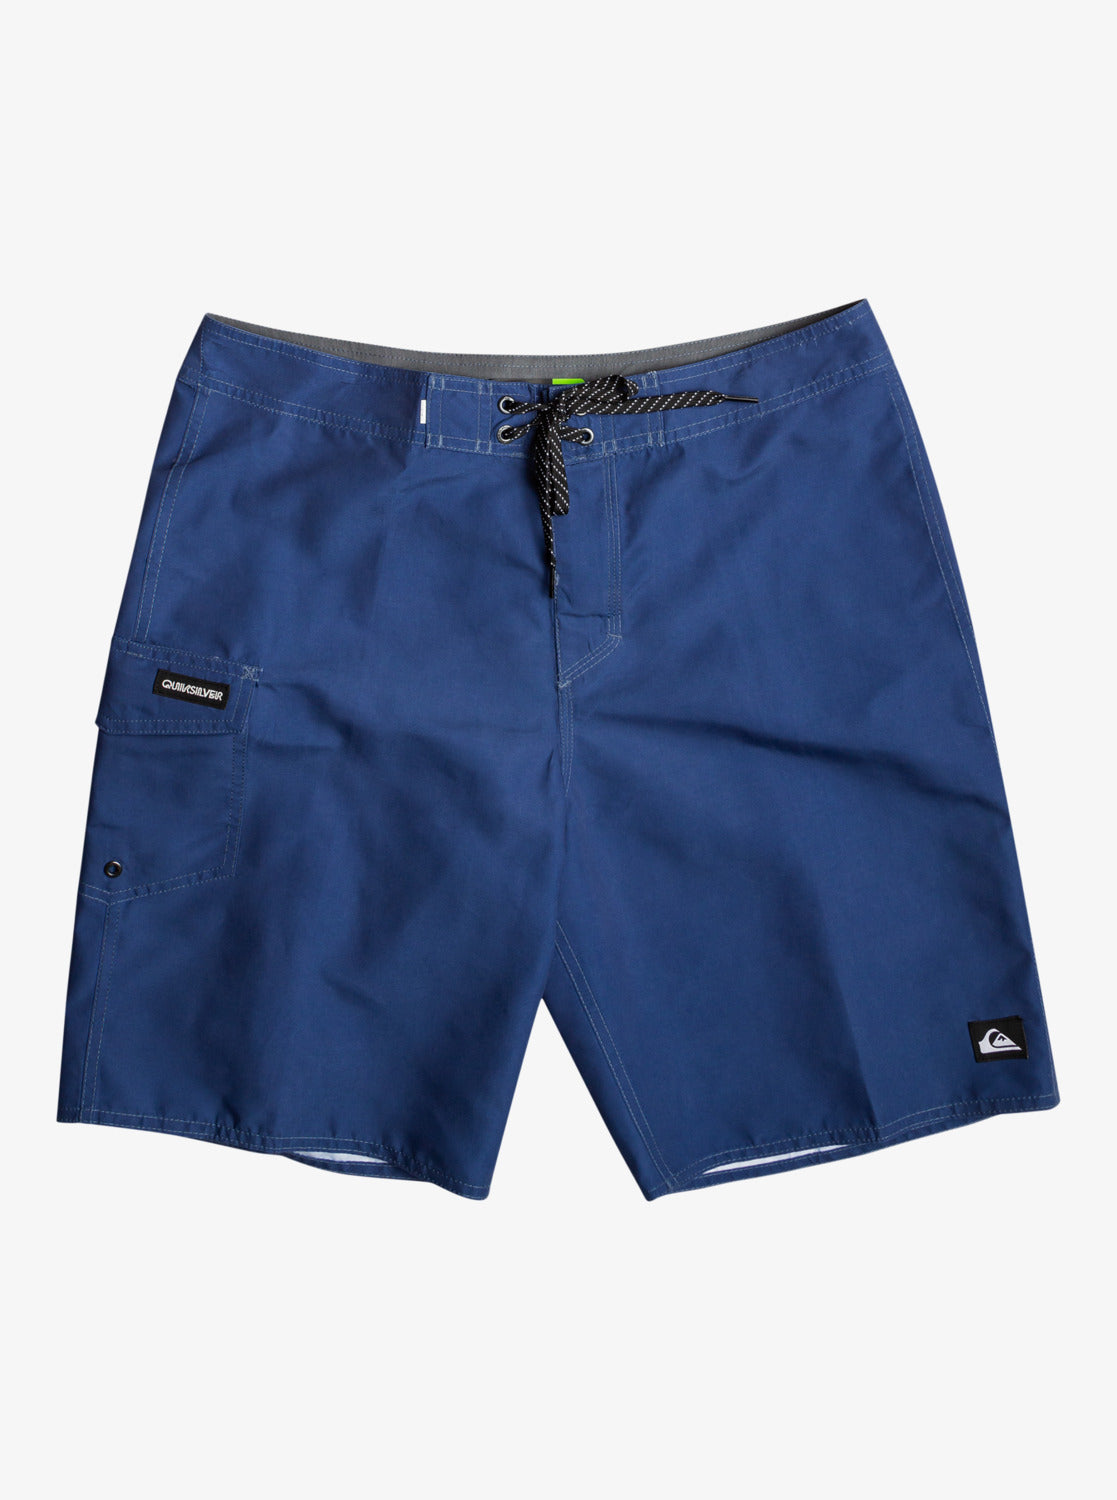 Quiksilver Everyday Solid 20" Boardshorts FRONT